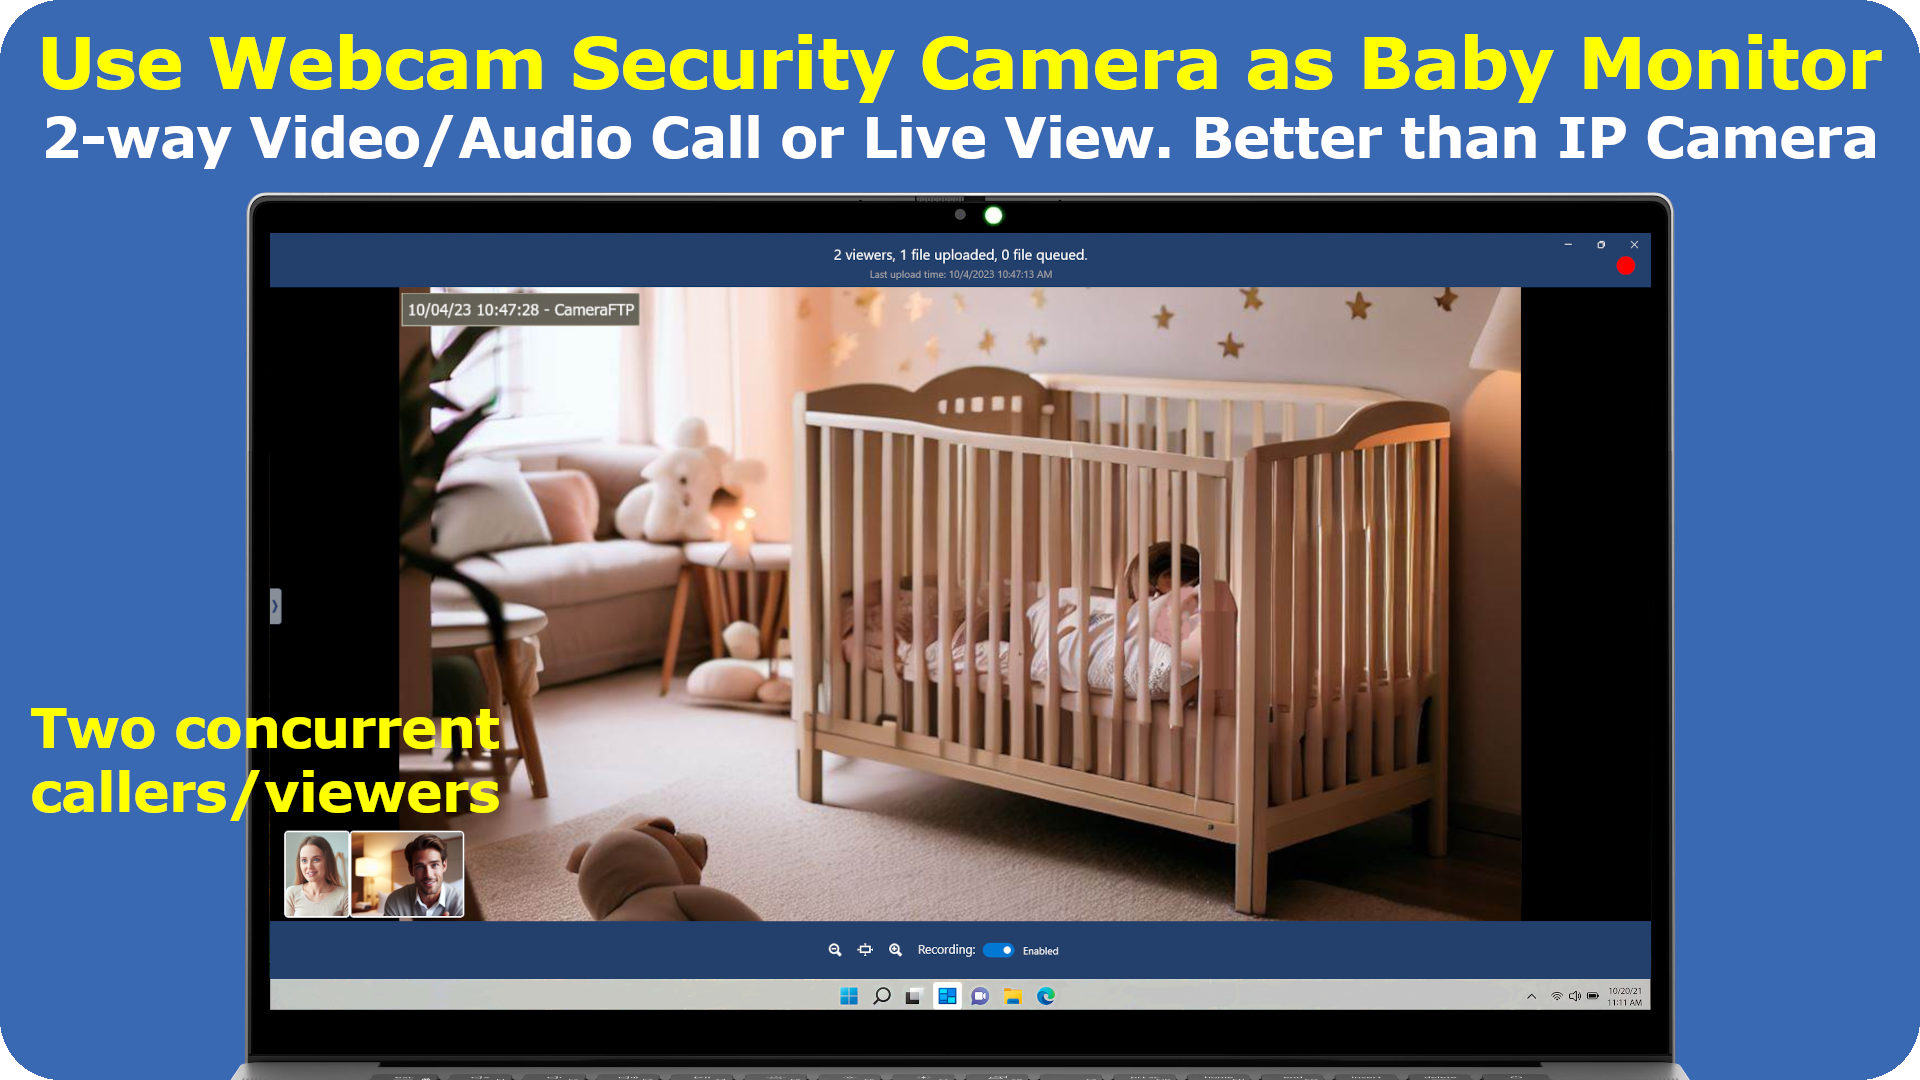 Use Webcam Security Camera as Baby Monitor. Free 2-way video/audio call, better than IP camera or baby monitor. Support multiple callers/viewers.